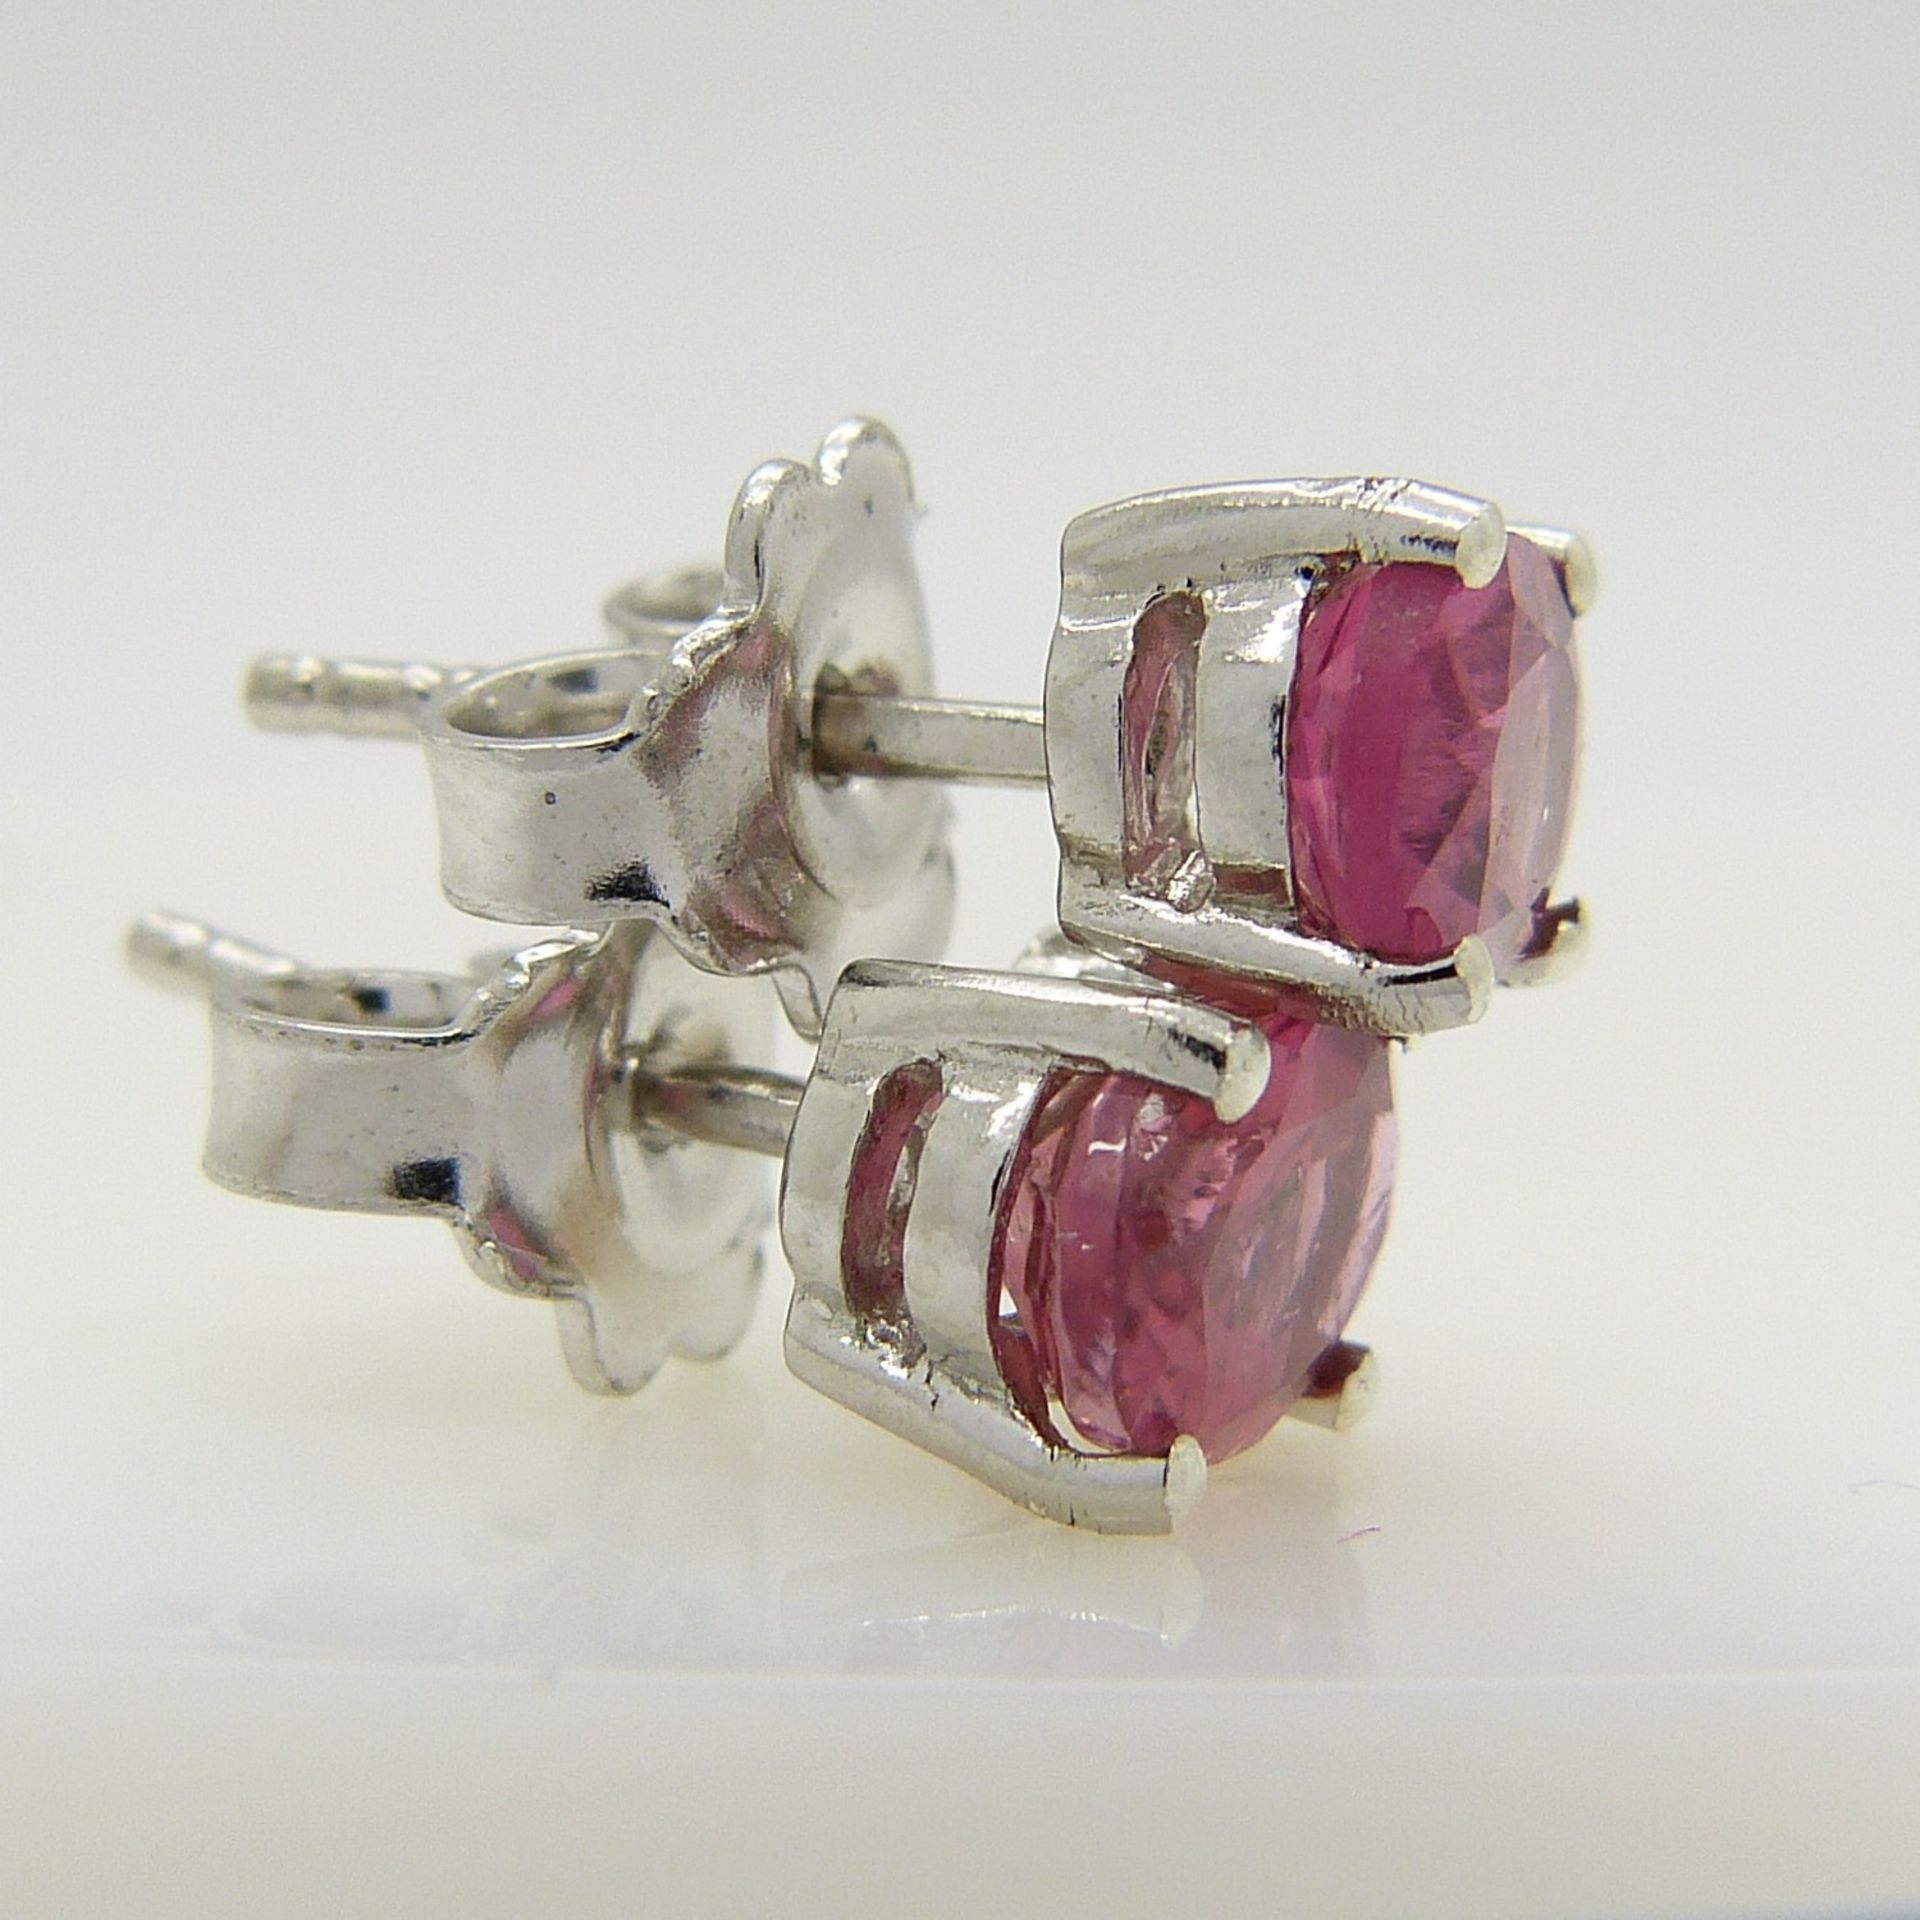 A pair of silver ear studs set with pink tourmalines, 1.30 carats (approx) - Image 4 of 5